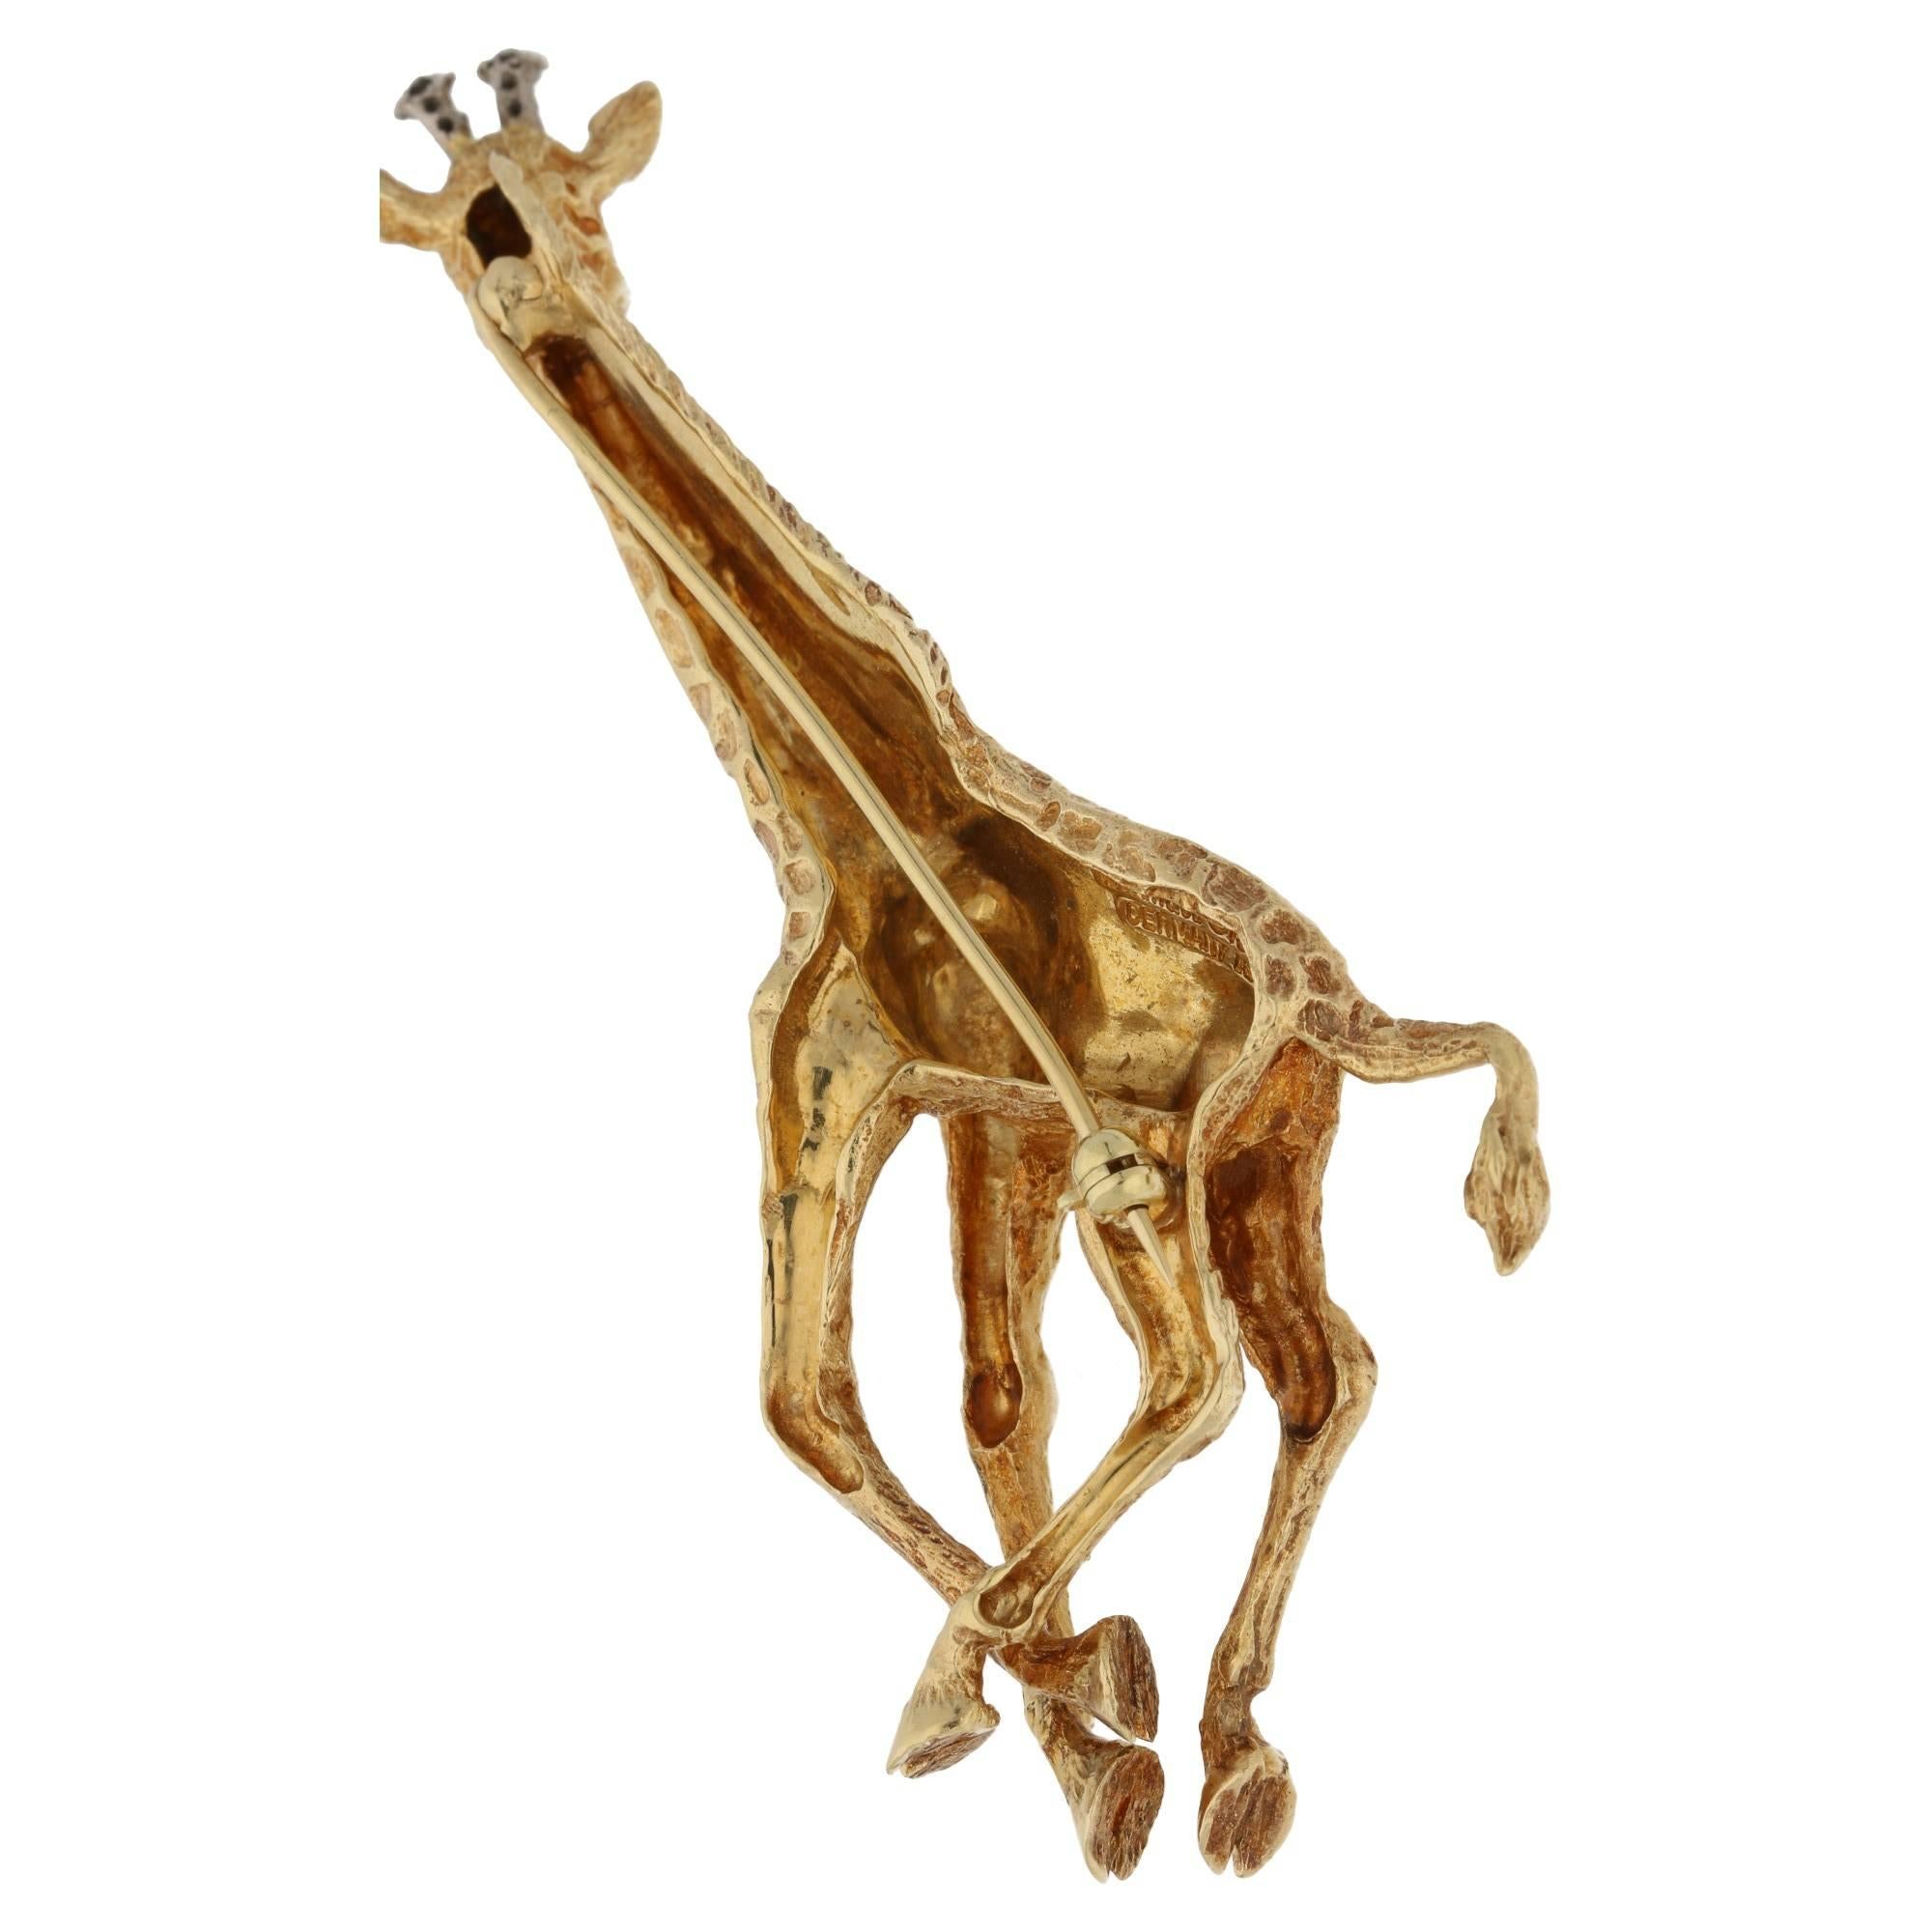 A diamond and sapphire set giraffe brooch, by Tiffany&Co. The giraffe is finely textured, in mid gallop, set with brilliant-cut diamond horns and circular-cut sapphire eyes. Length 7.5 cm, signed ‘Tiffany&Co. 1989, Germany’.